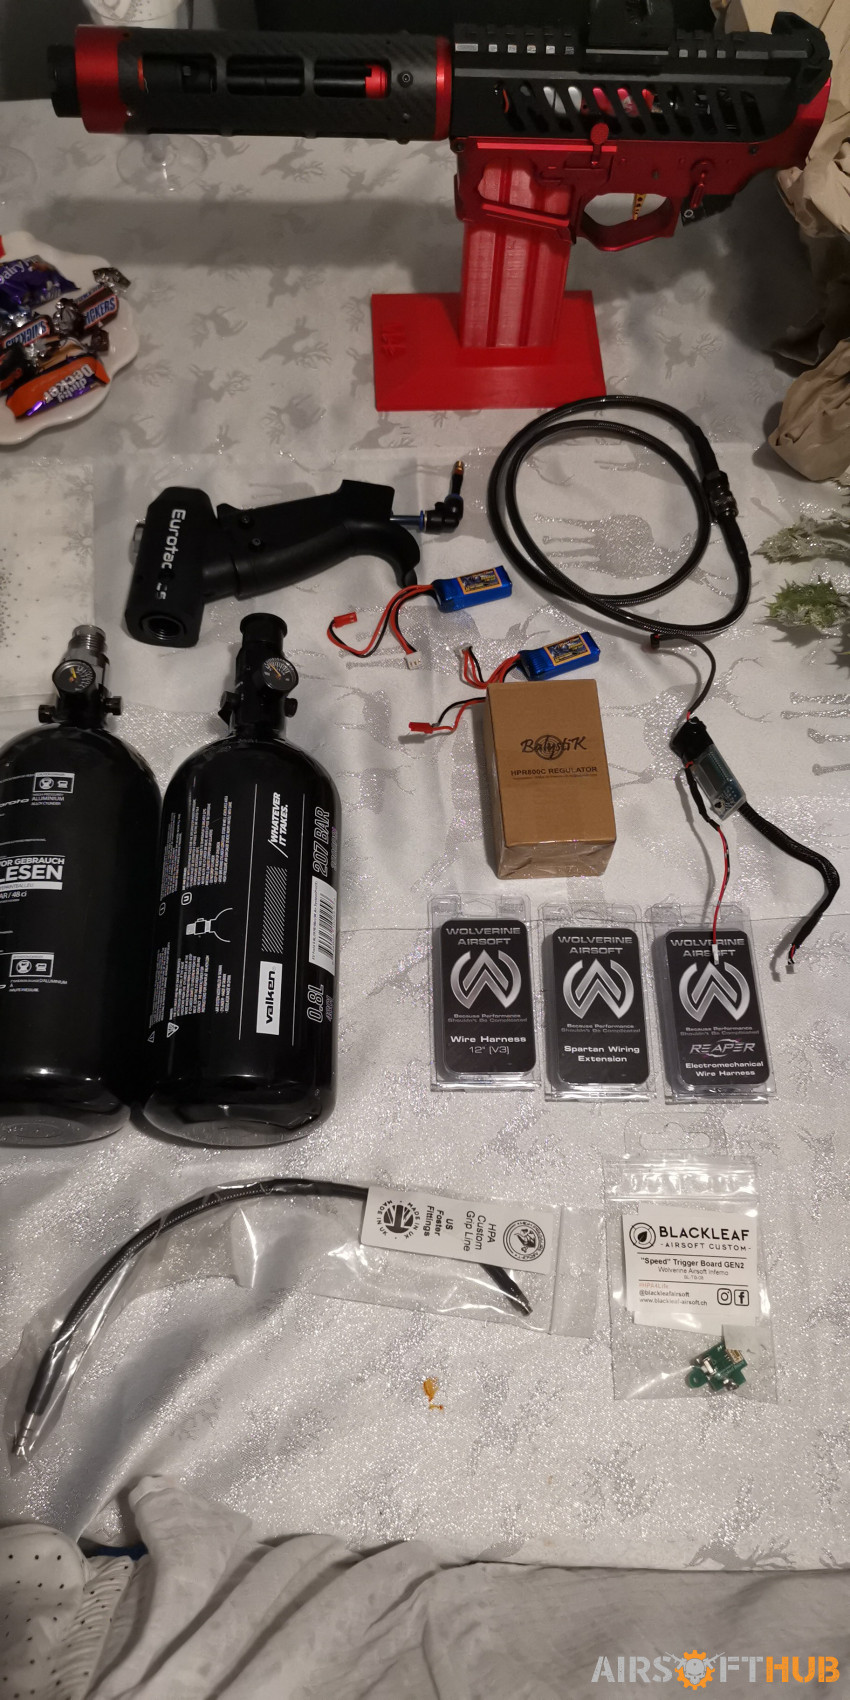 Airsoft hpa parts - Used airsoft equipment